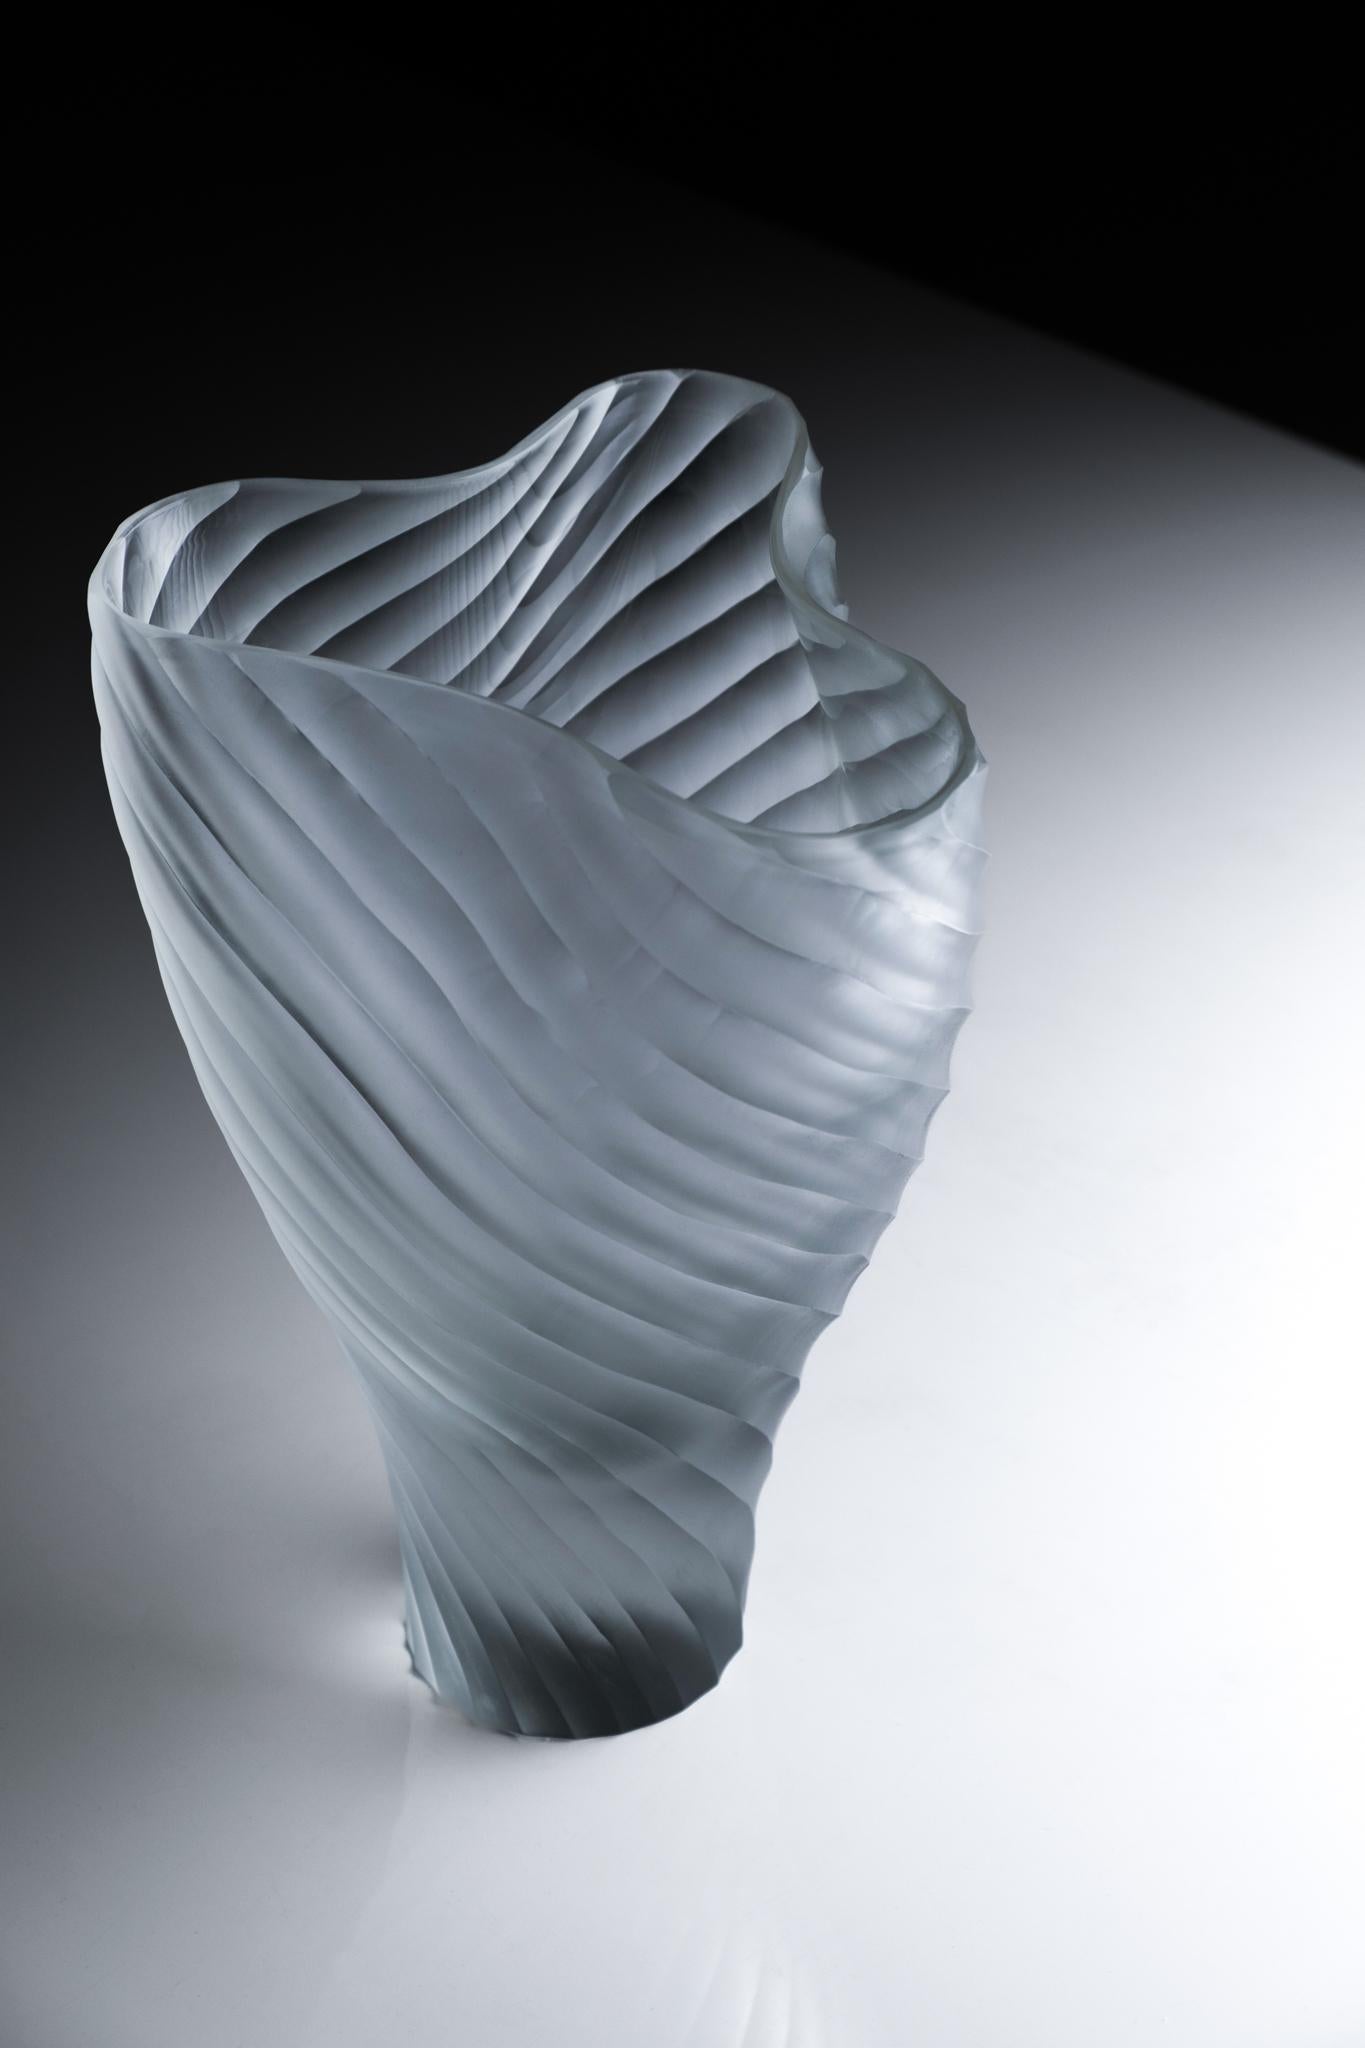 Mascareta vase by Purho
Dimensions: D18 x H28 cm
Materials: Murano glass
Available in other colors.

Mascareta is a vase from the Laguna Collection designed by Ludovica+Roberto Palomba for Purho in spring 2022.
Characterised by generous forms